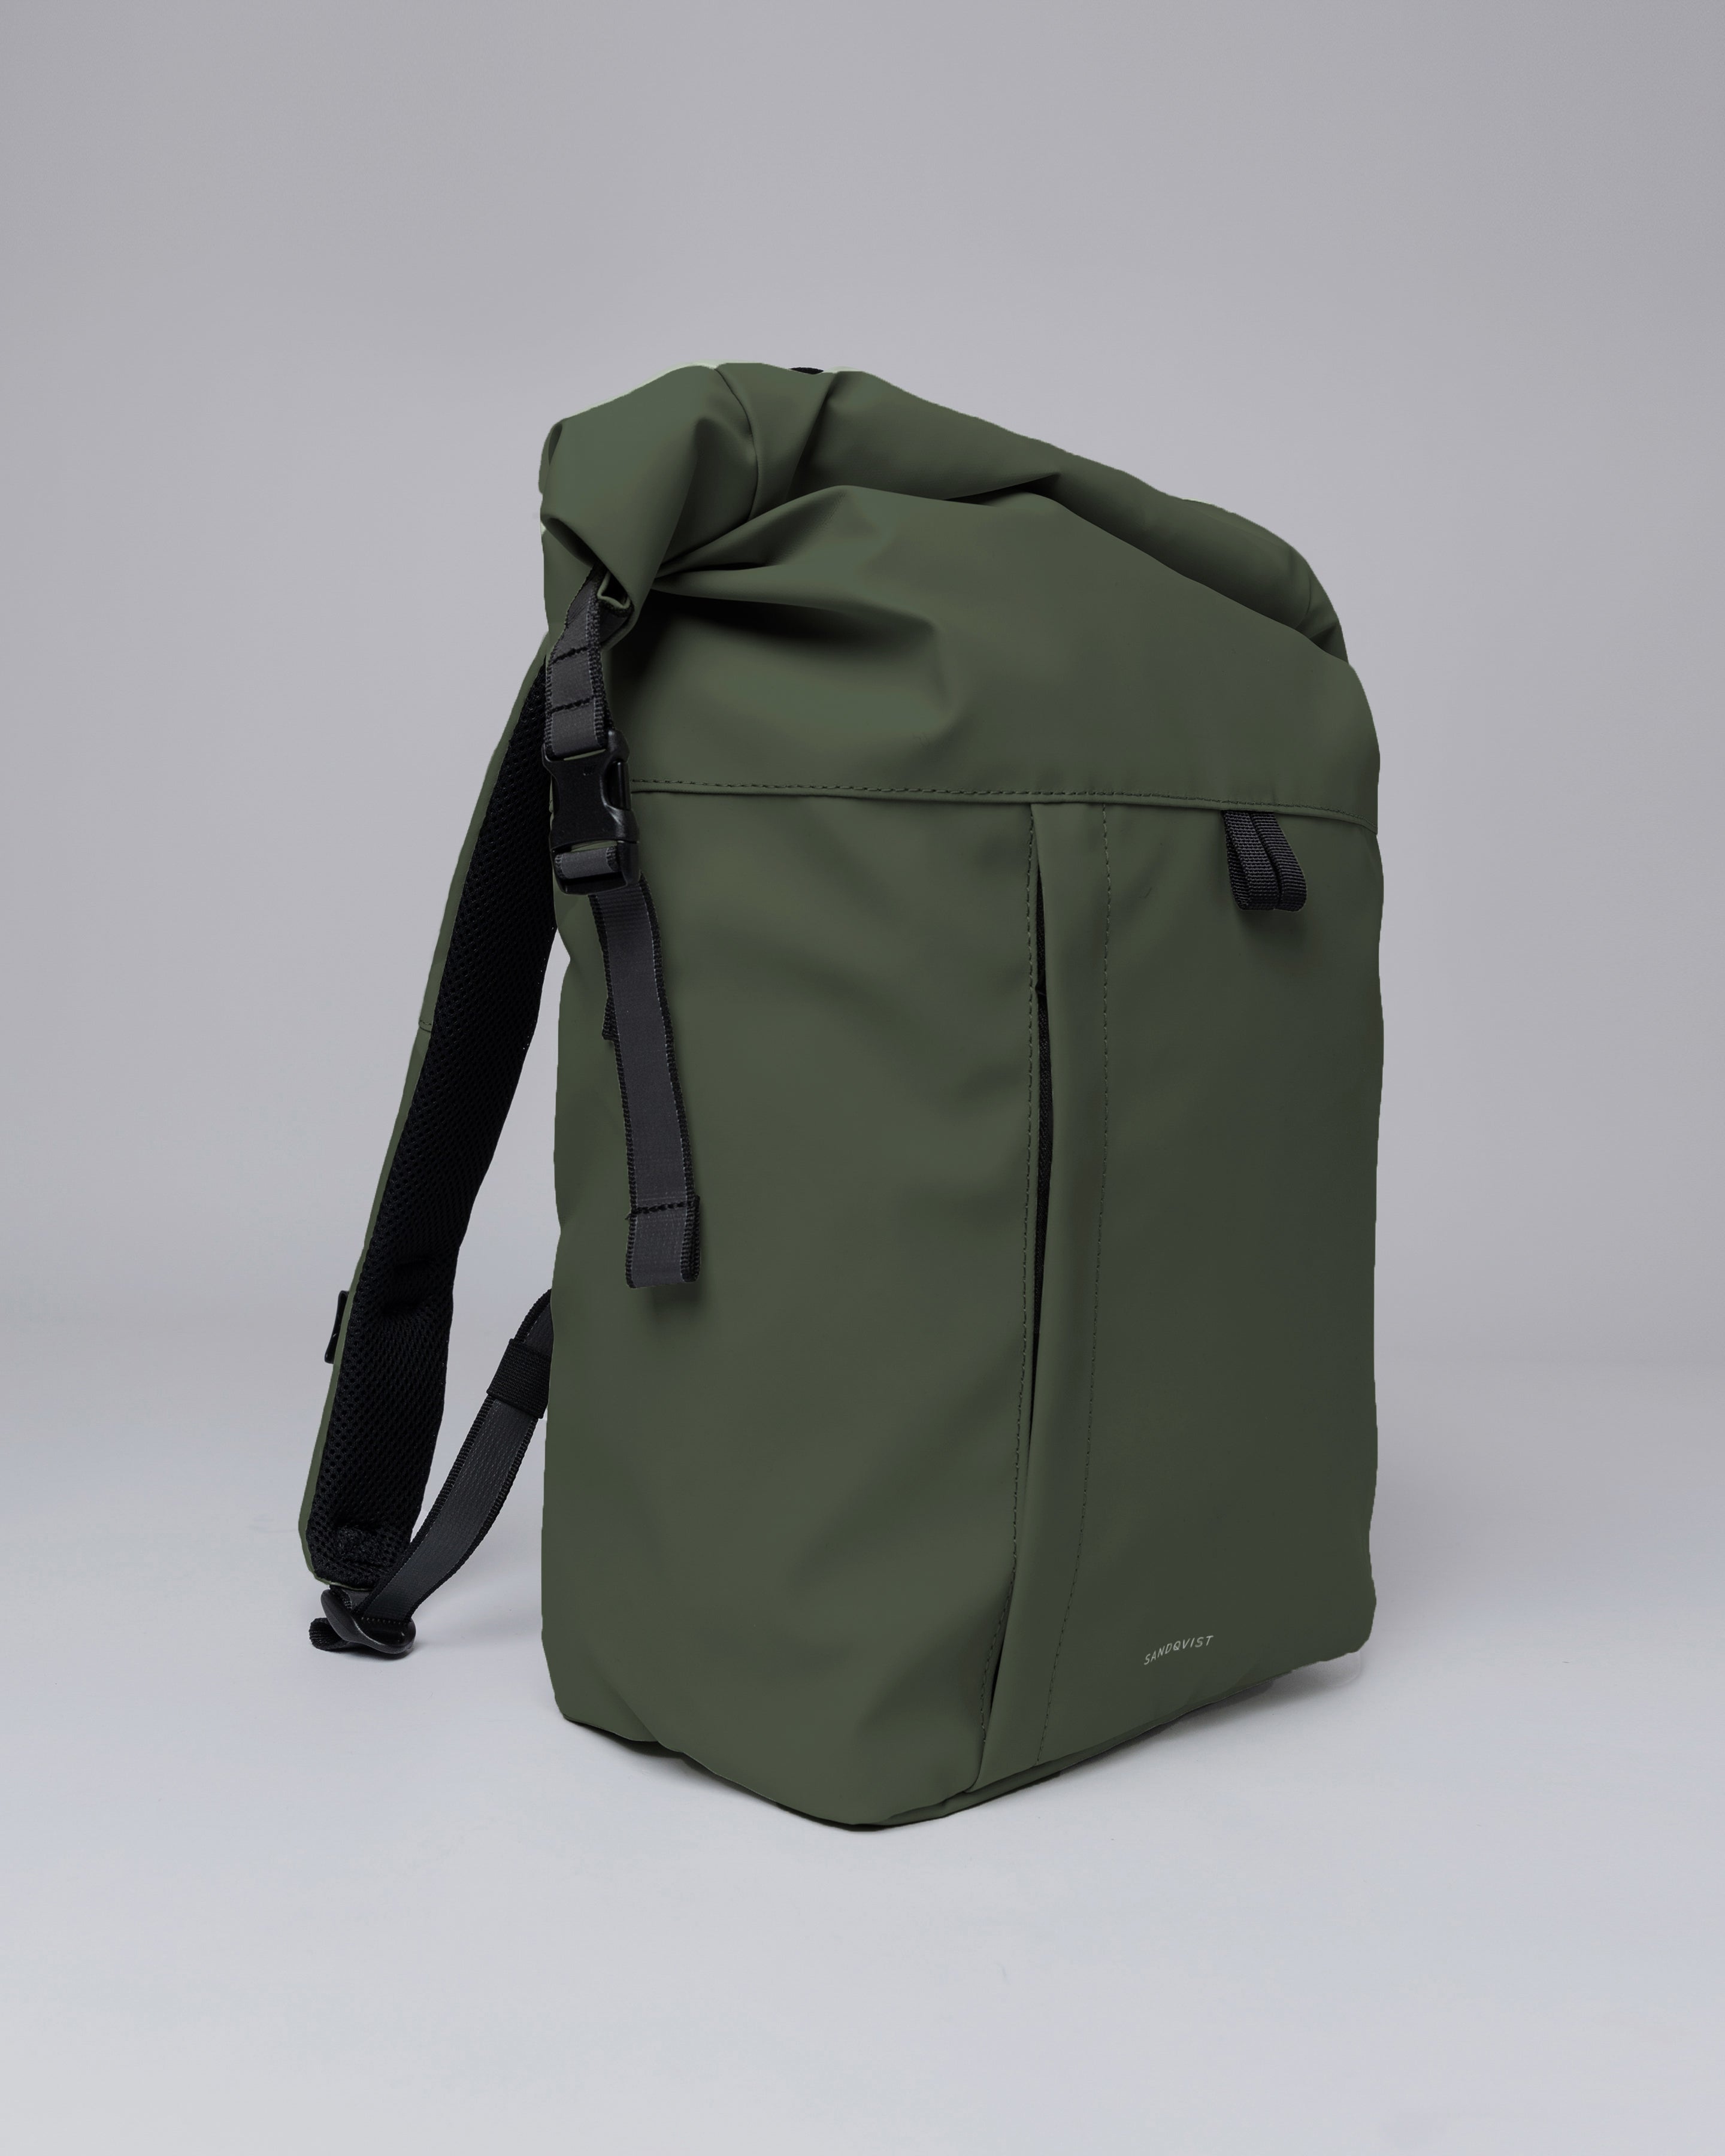 Sandqvist Konrad Backpack in Green SQA2183 | Shop from eightywingold an official brand partner for Sandqvist Canada and US. 